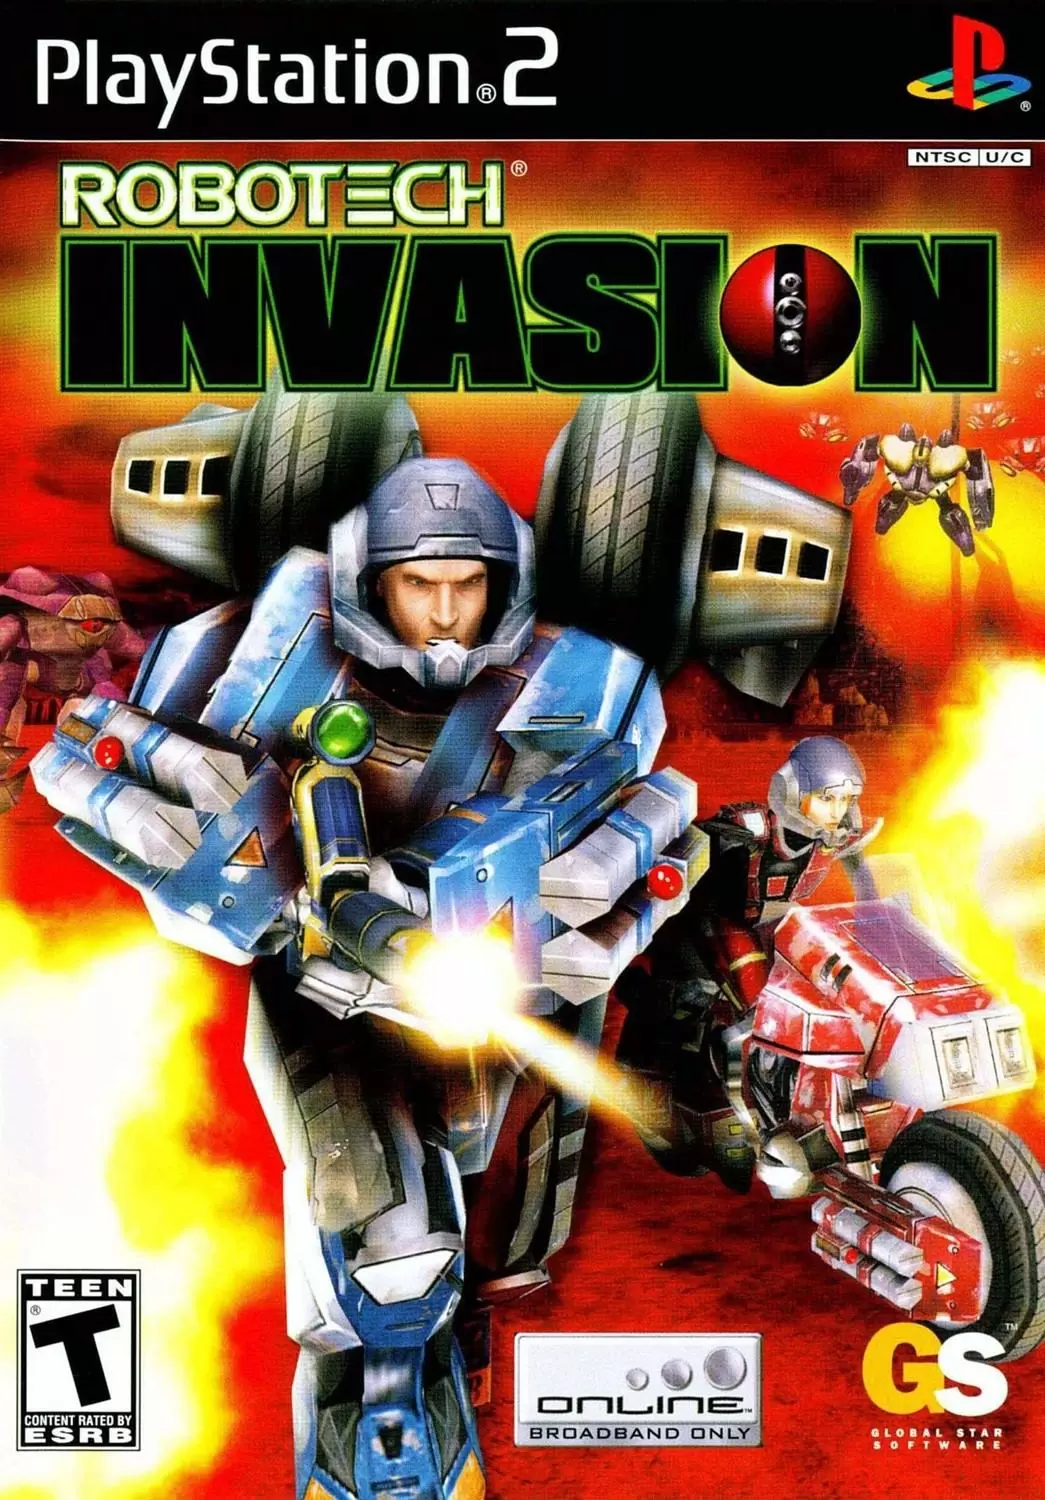 PS2 Games - Robotech: Invasion